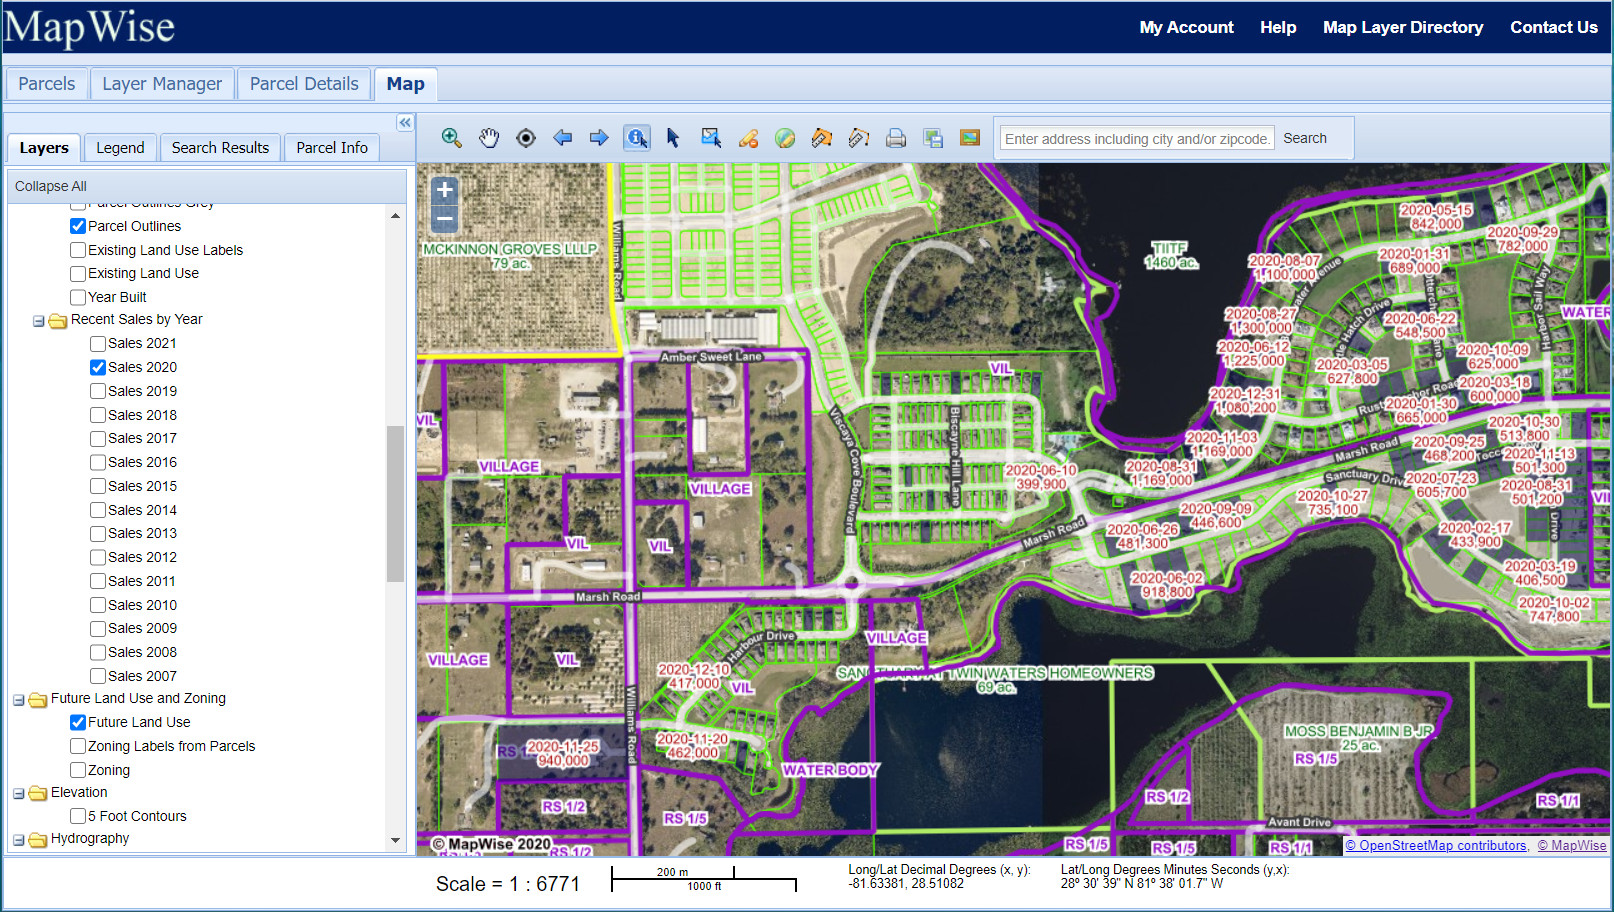 MapWise Map Viewer showing aerial photos, parcels, and large parcels aggregated by owner name